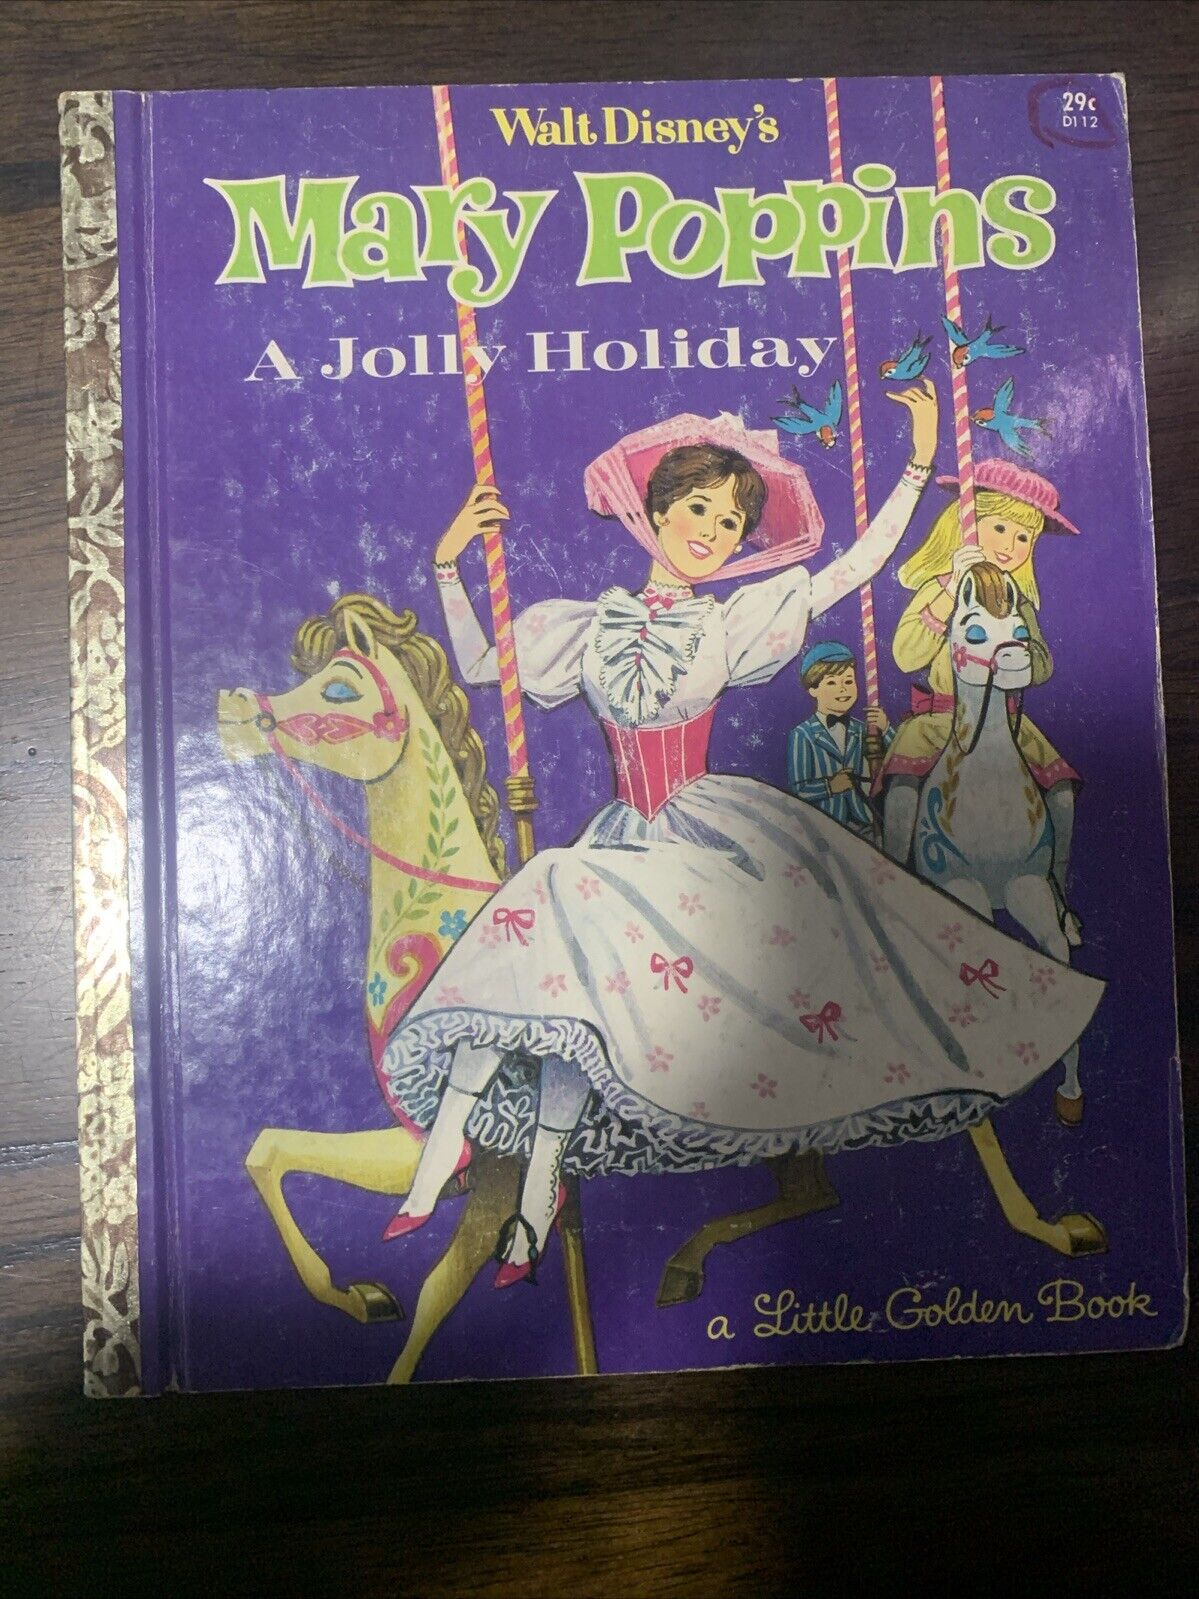 A a little golden book Mary Poppins a Jolly Holiday